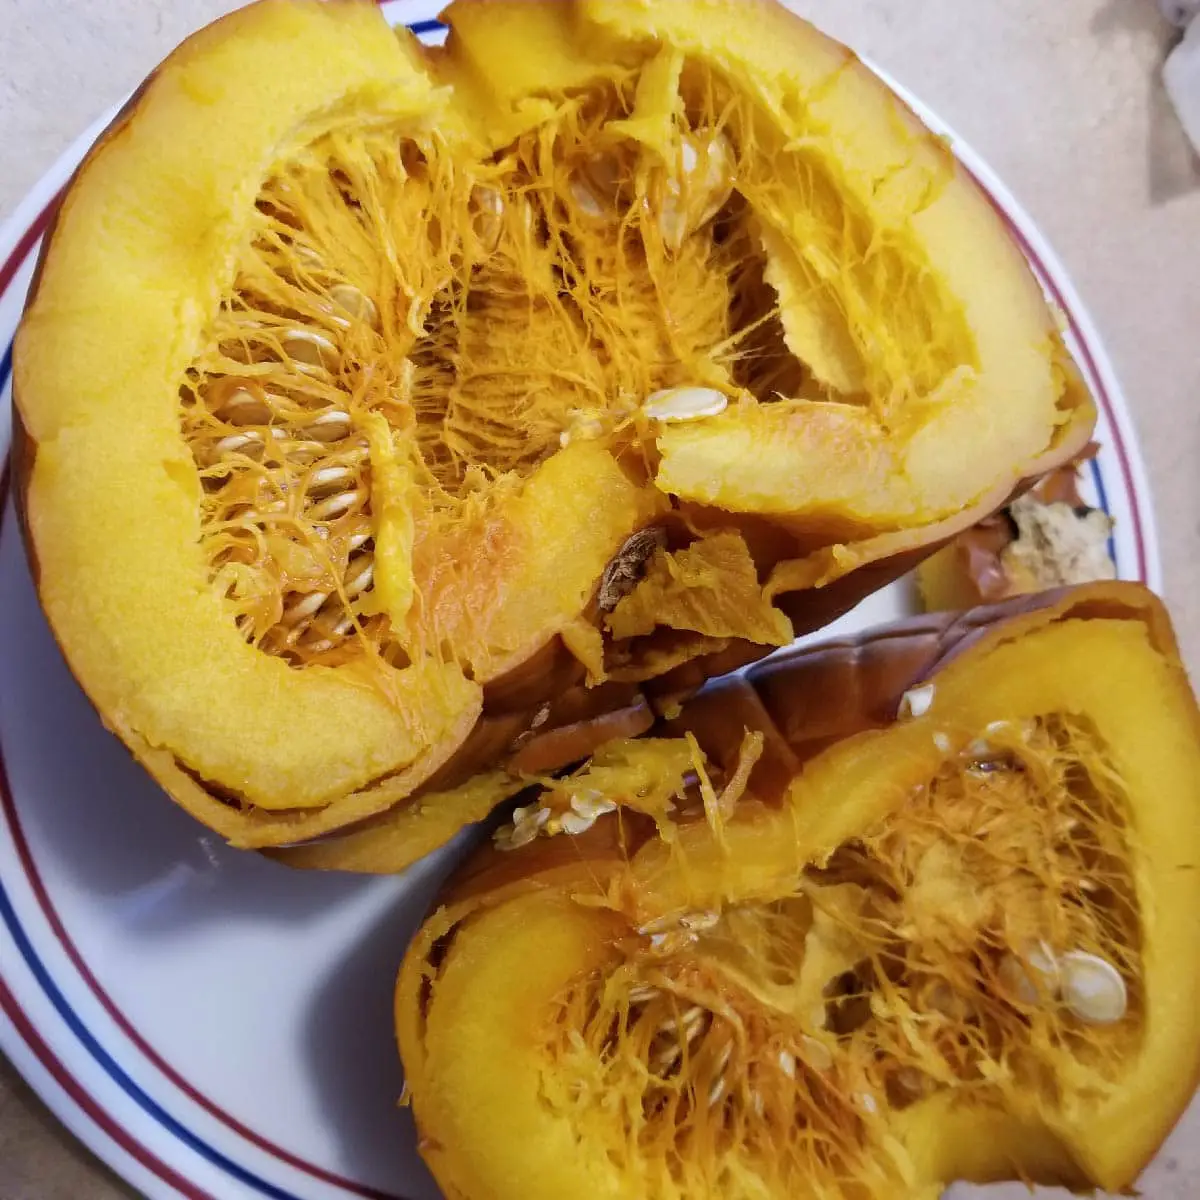 Pumpkin cut in half after cooking before removing seeds.